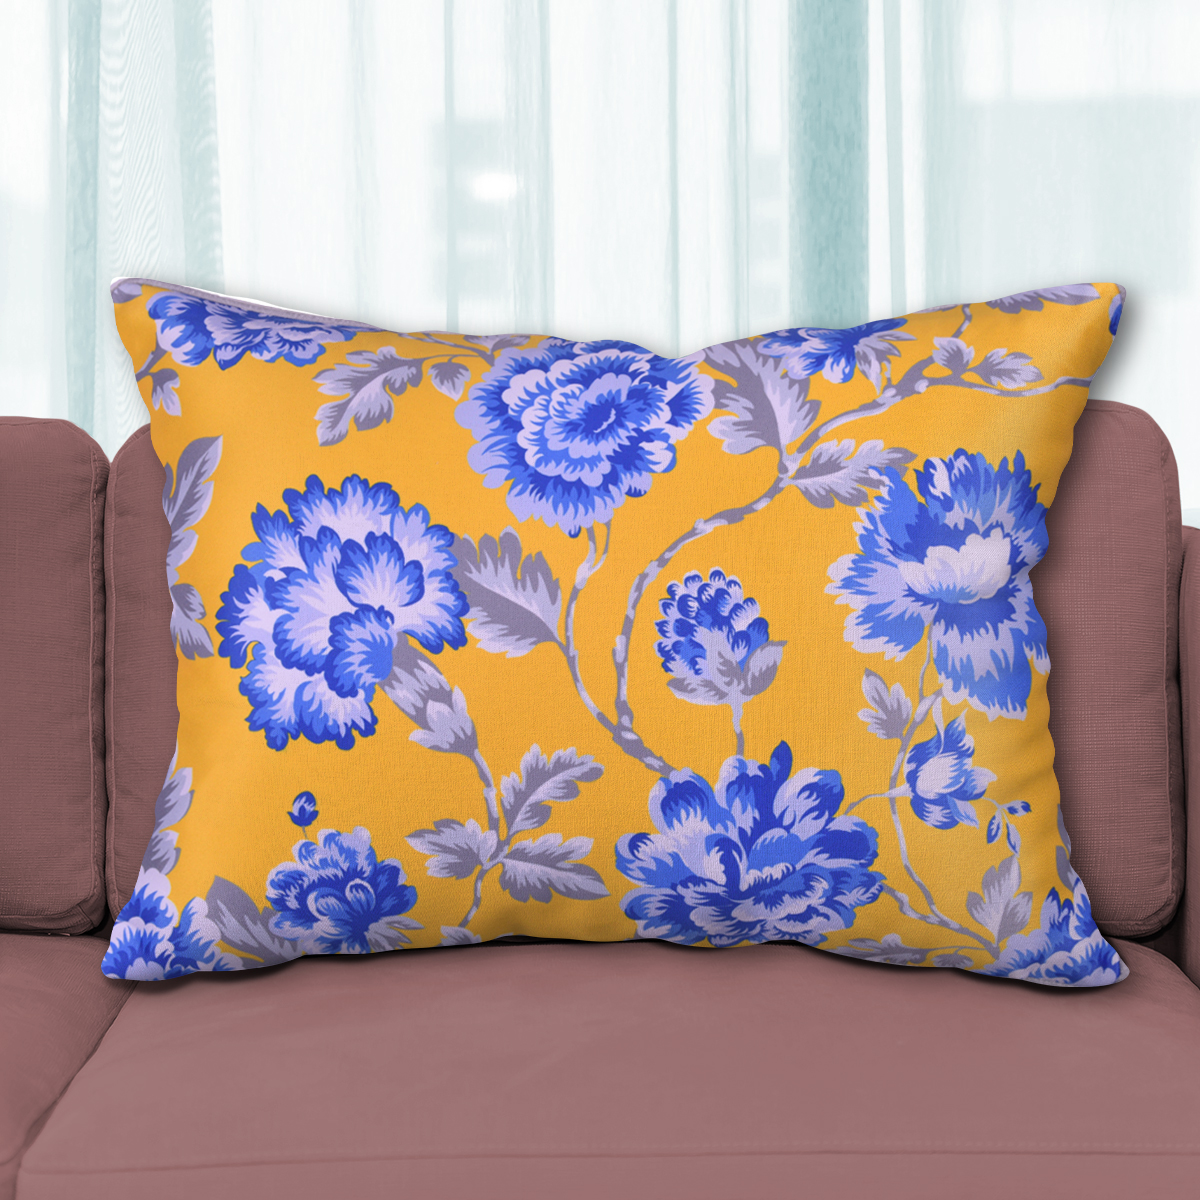 Throw Pillow Covers Set of 4 for Living Room Table, Floral Printed Cushion Case, 14x20 inches - Yellow - Home Decor - image 1 of 14